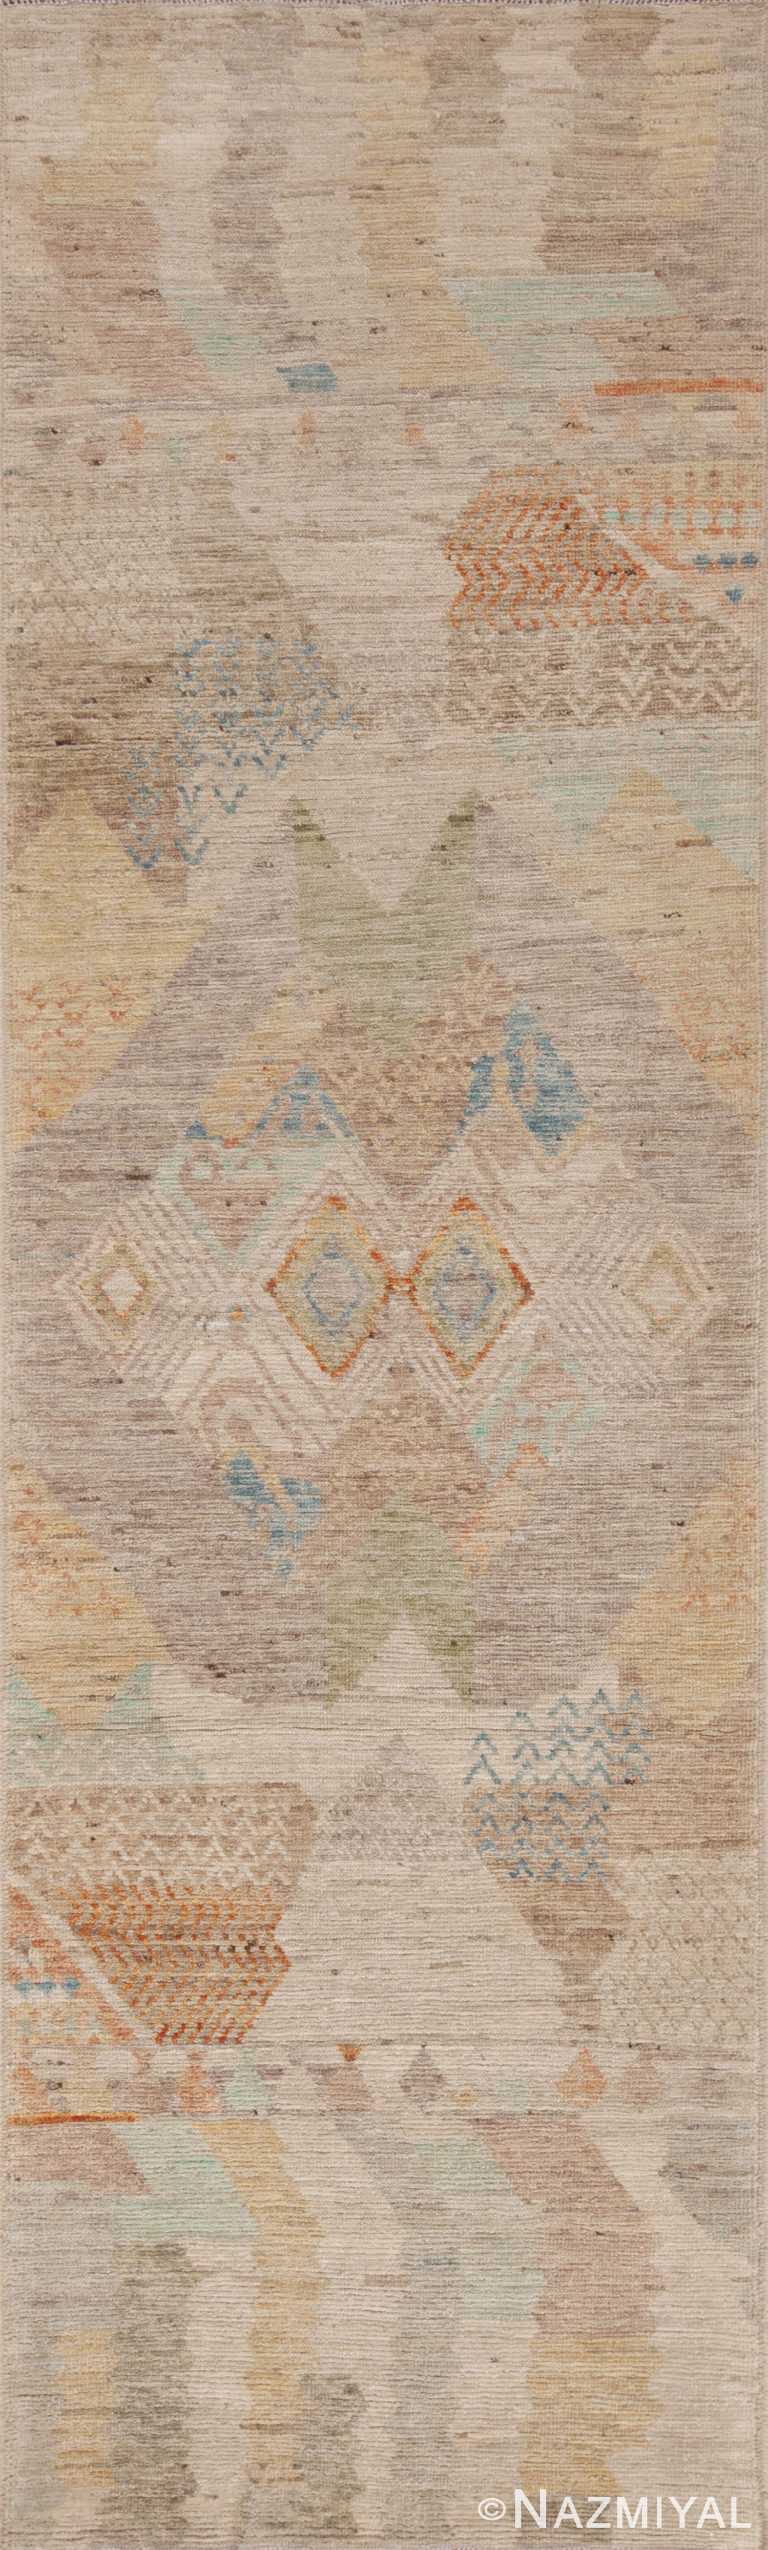 A Beautifully Artistic and Decorative Rustic Contemporary Tribal Geometric Design Modern Hallway Runner Rug 11038 by Nazmiyal Antique Rugs